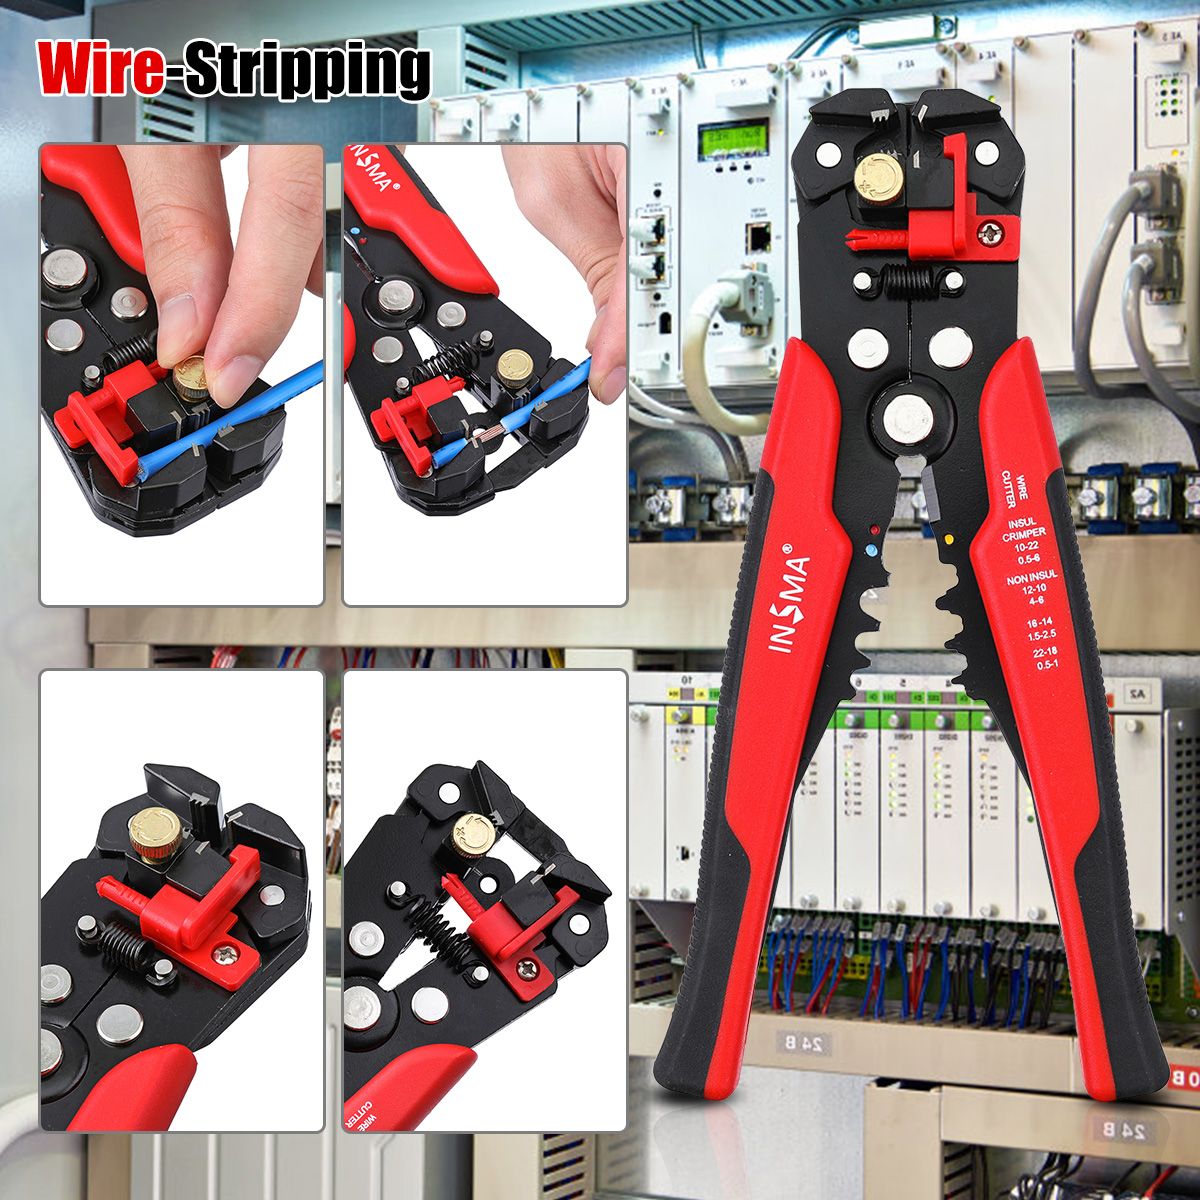 INSMA-Multifunctional-Automatic-Terminal-Crimper-Plier-Wire-and-Cable-Stripping-Pliers-Wire-Strippin-1543323